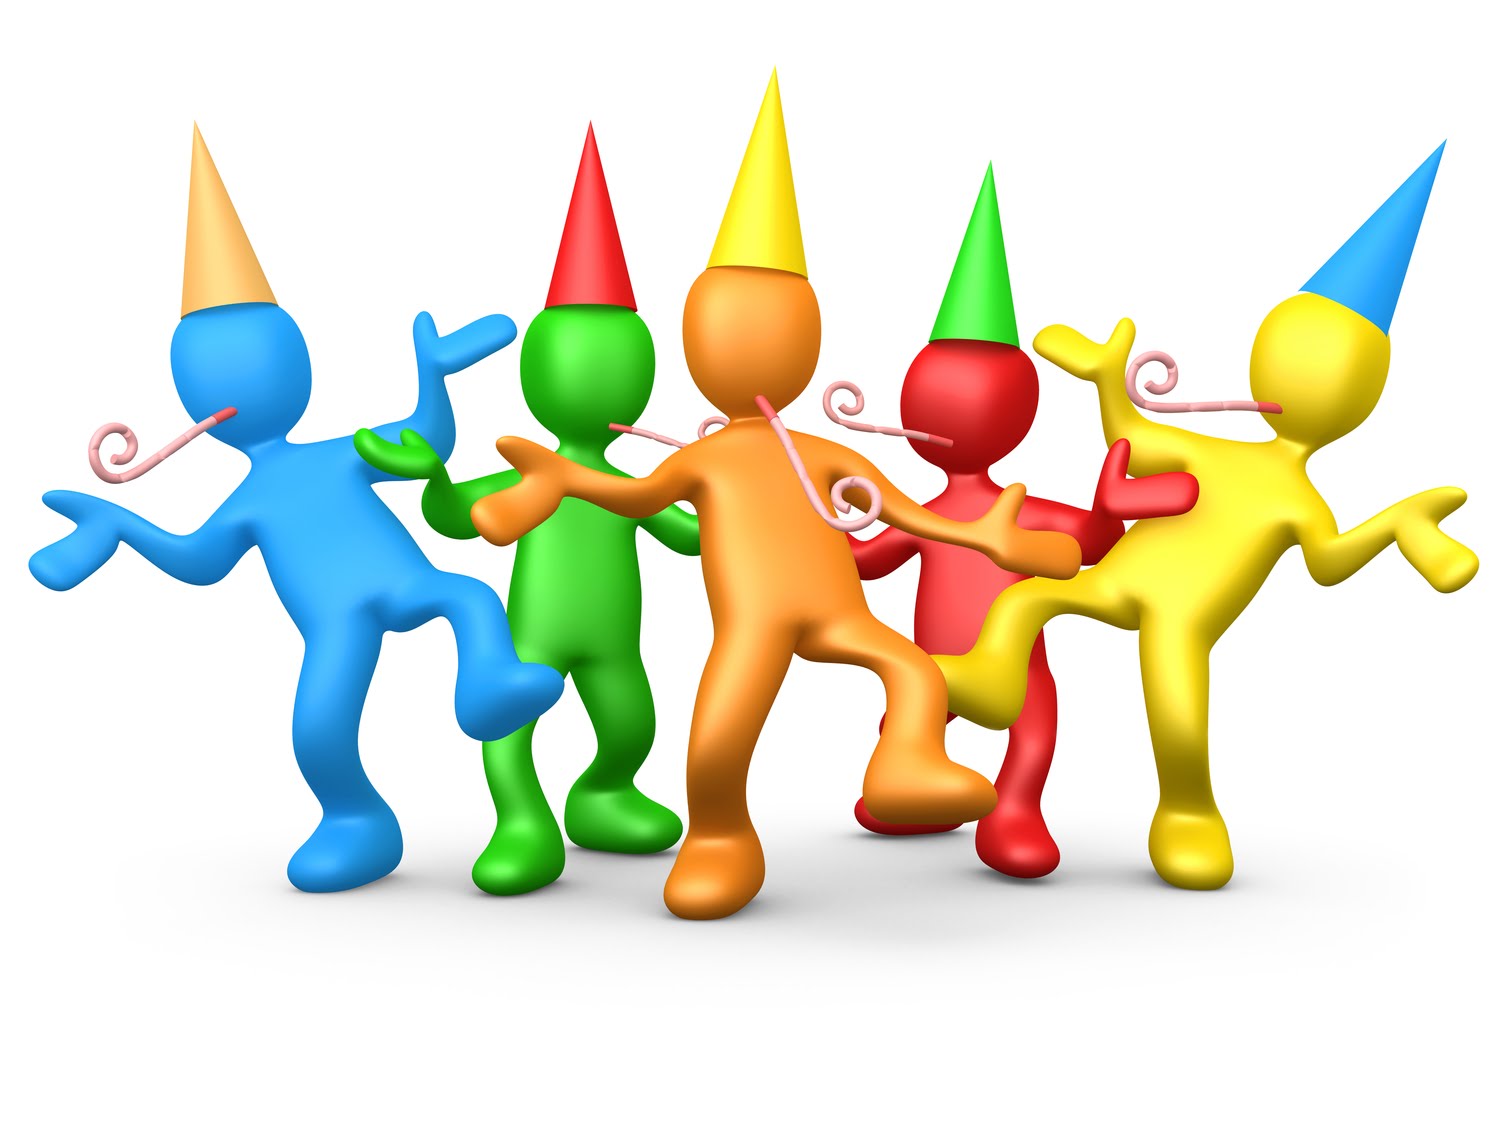 Celebration Clip Art to Download - dbclipart.com